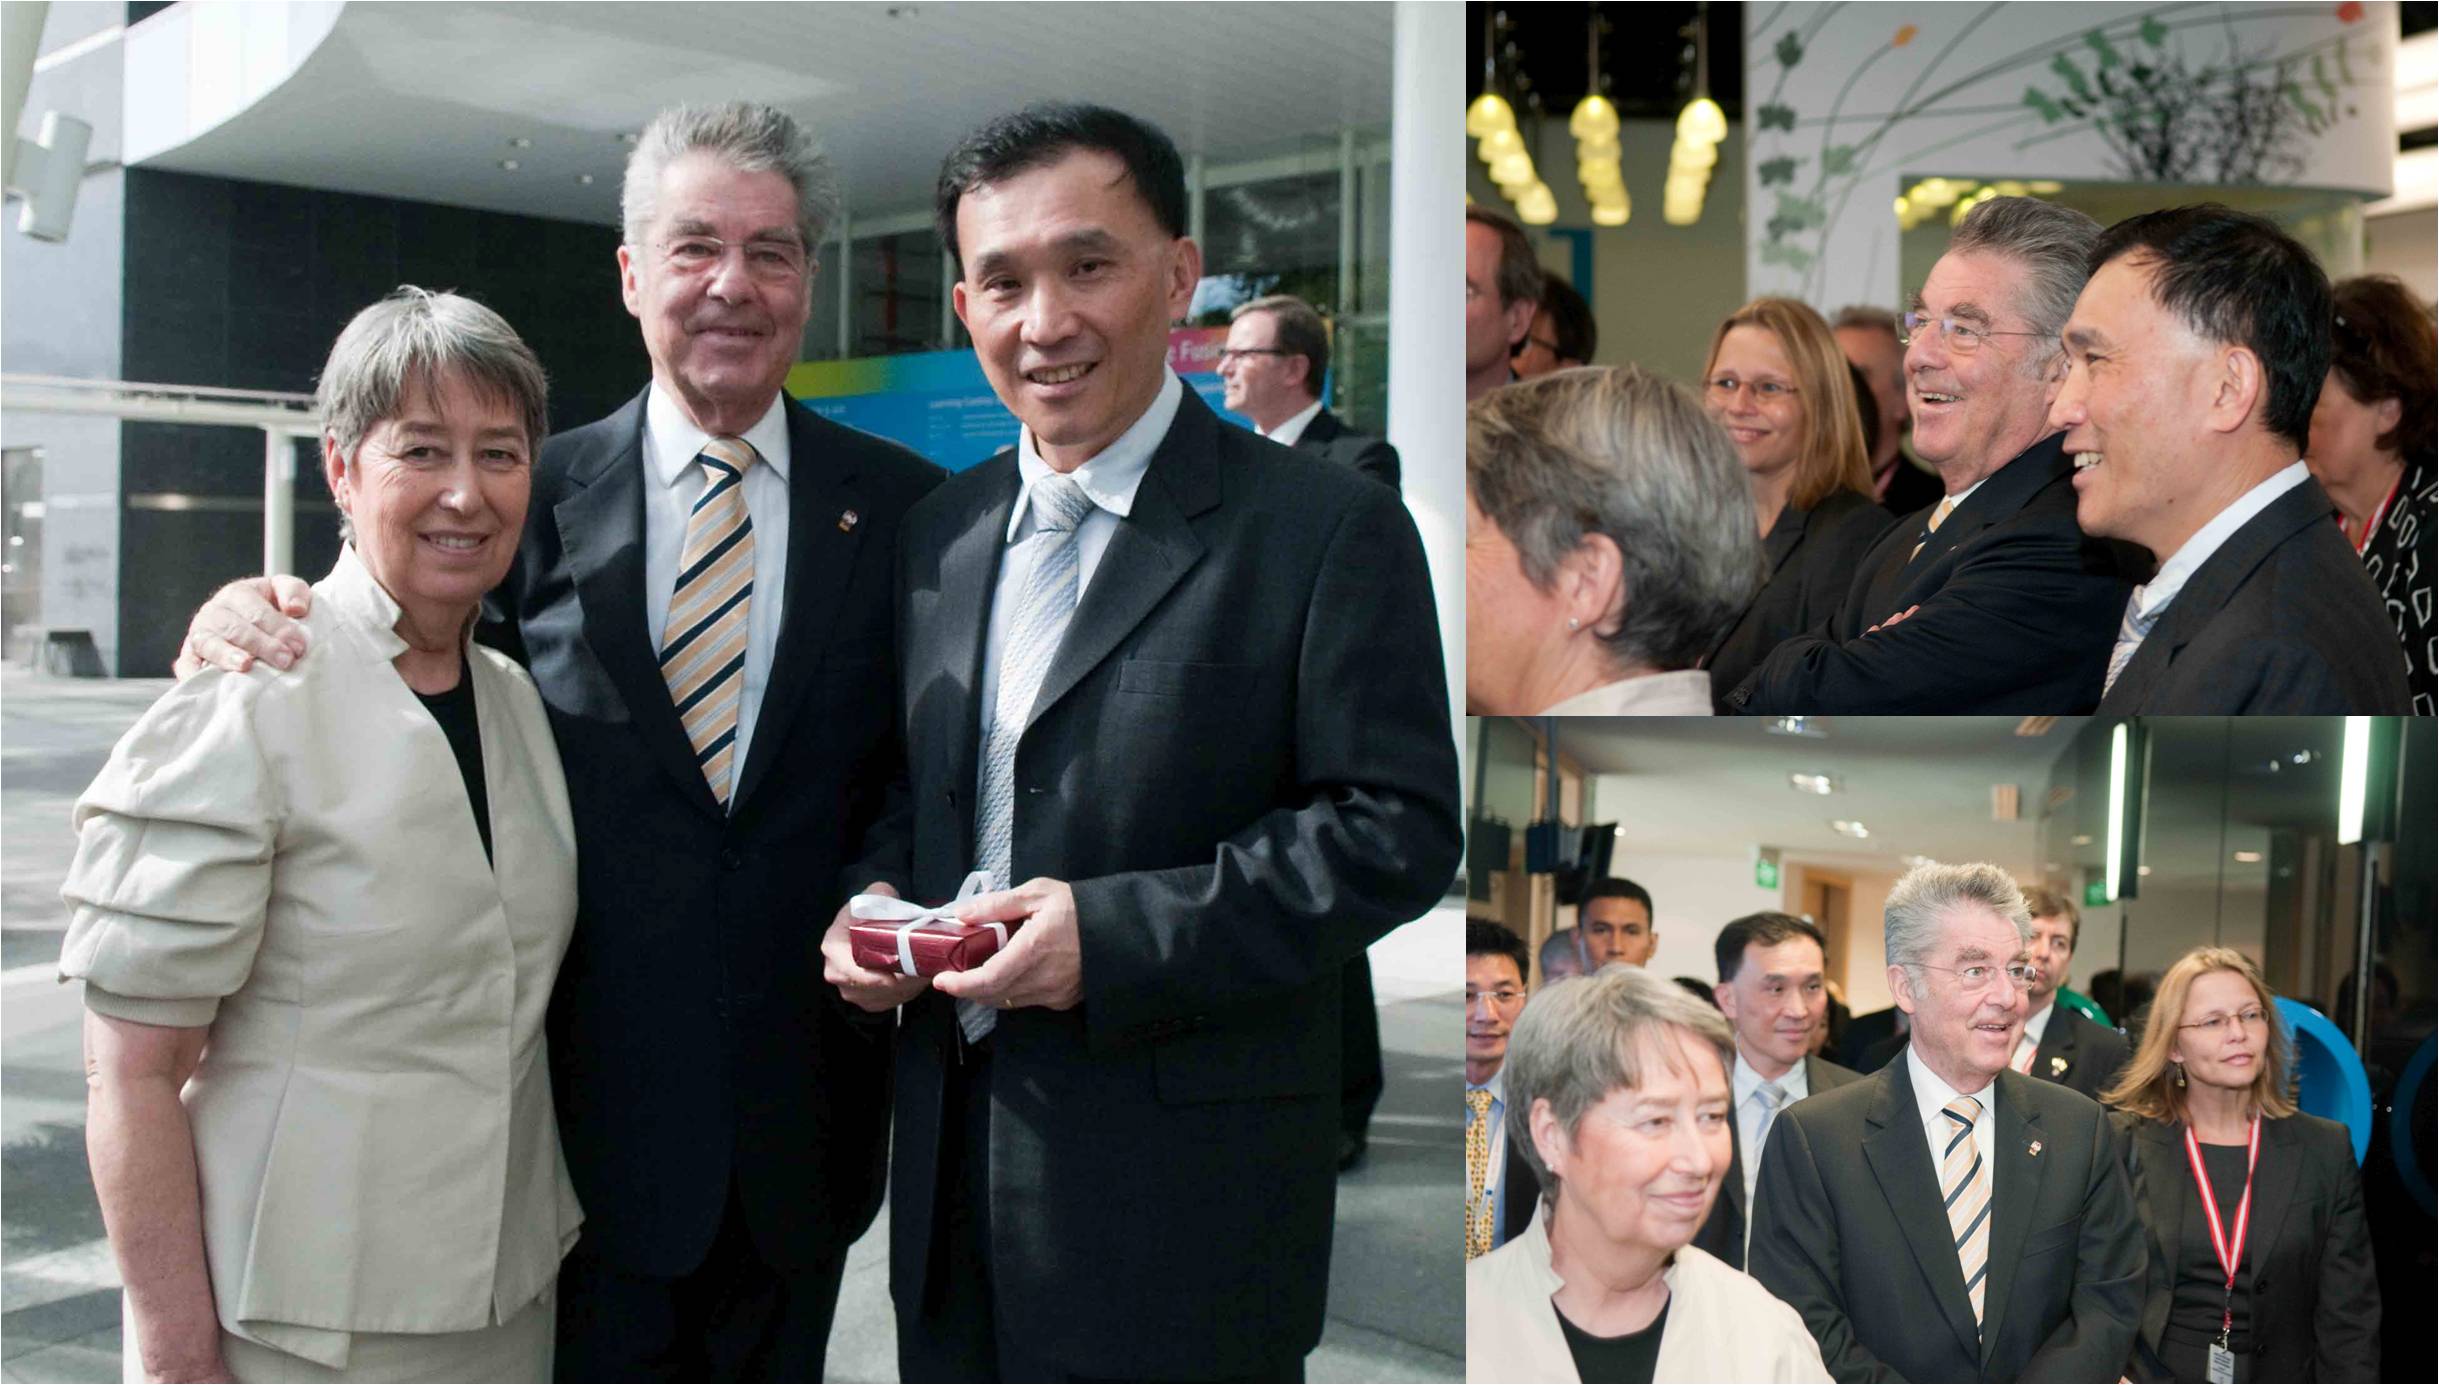 Visit by His Excellency Dr Heinz Fischer- Federal President of the Republic of Austria